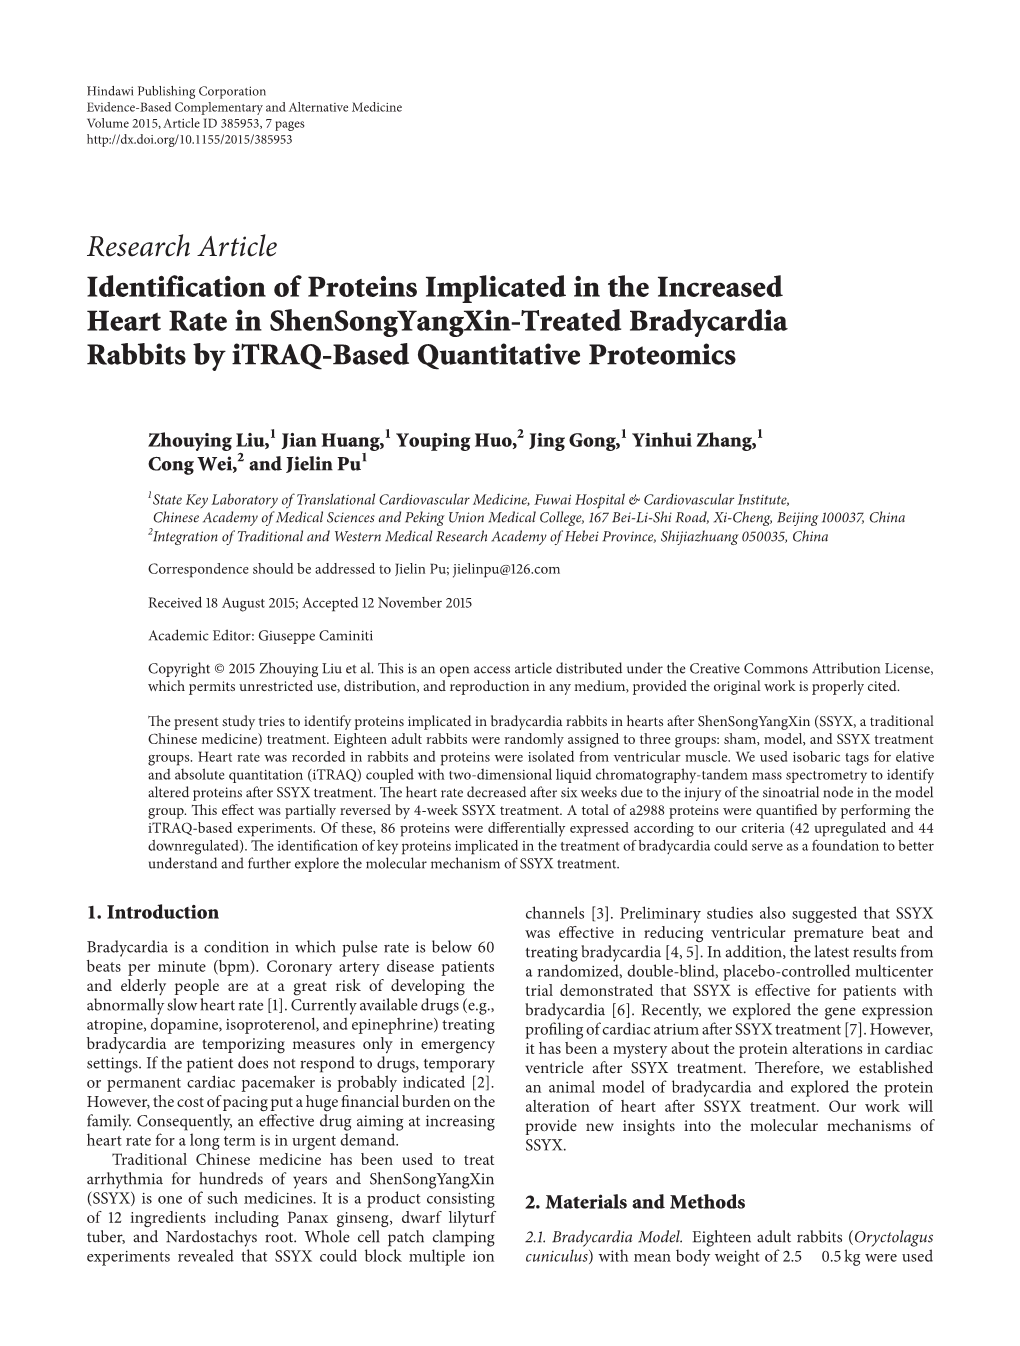 Identification of Proteins Implicated in the Increased Heart Rate in Shensongyangxin-Treated Bradycardia Rabbits by Itraq-Based Quantitative Proteomics